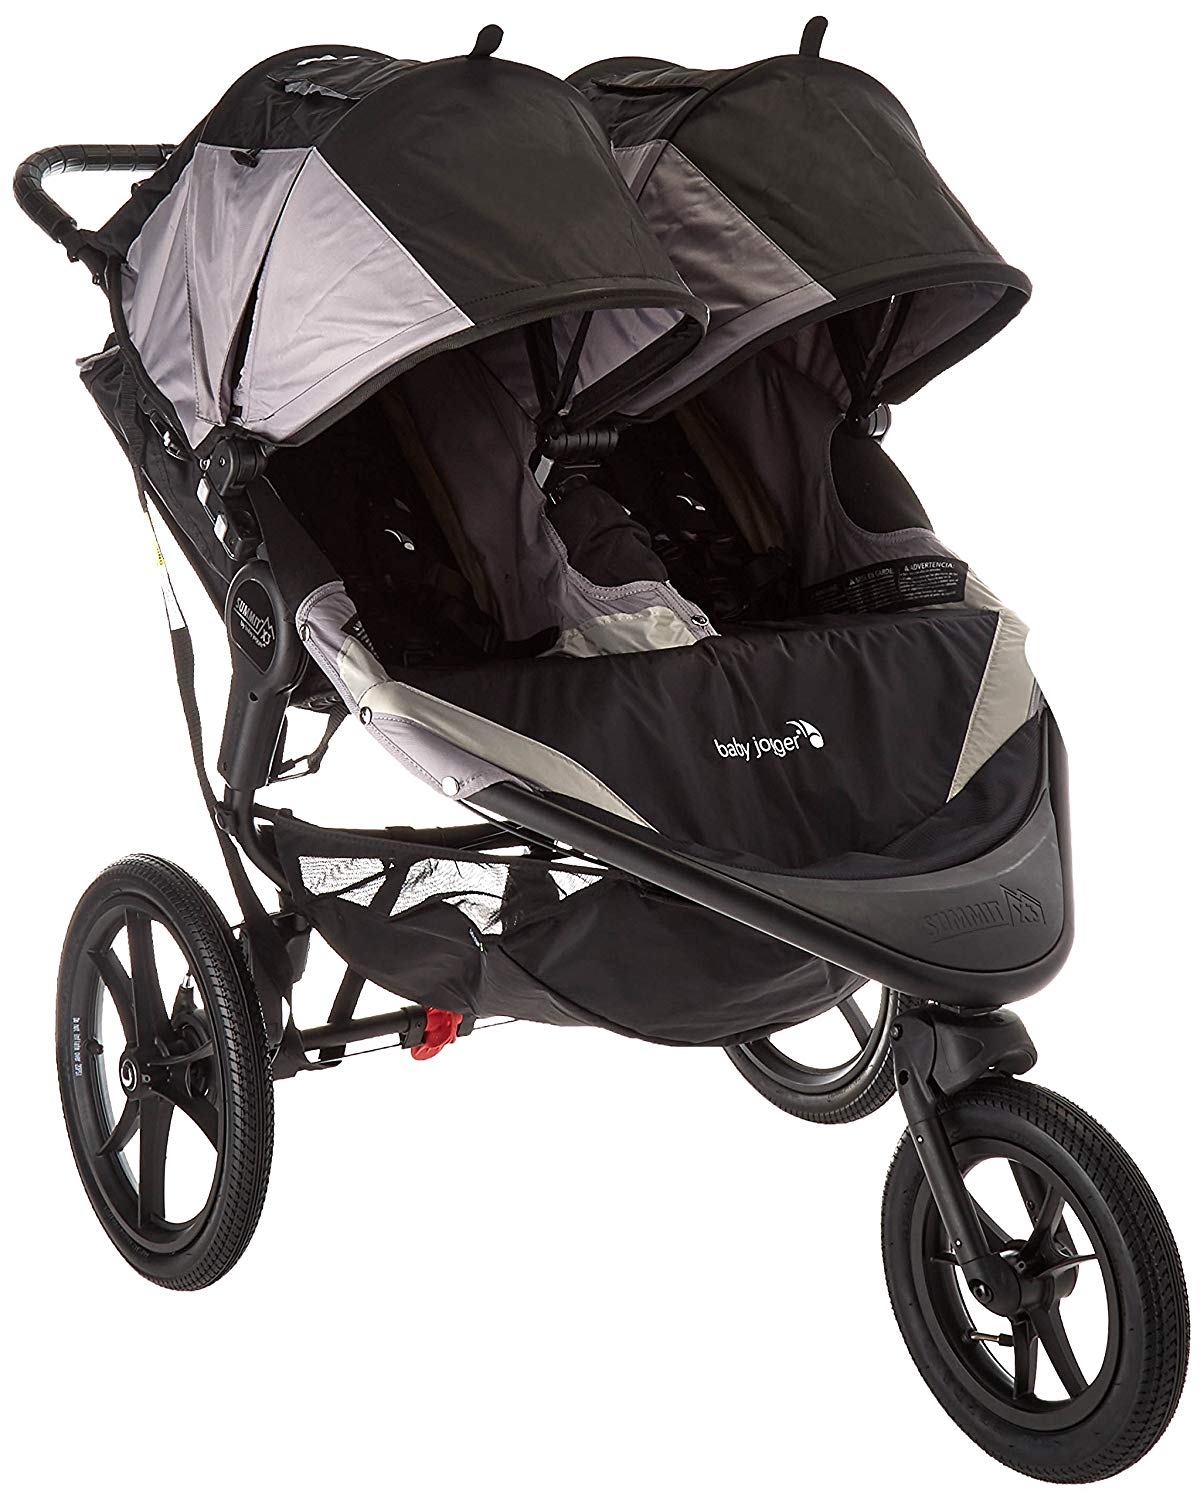 Baby Summit Double Stroller Review: a solid all-terrain jogger.